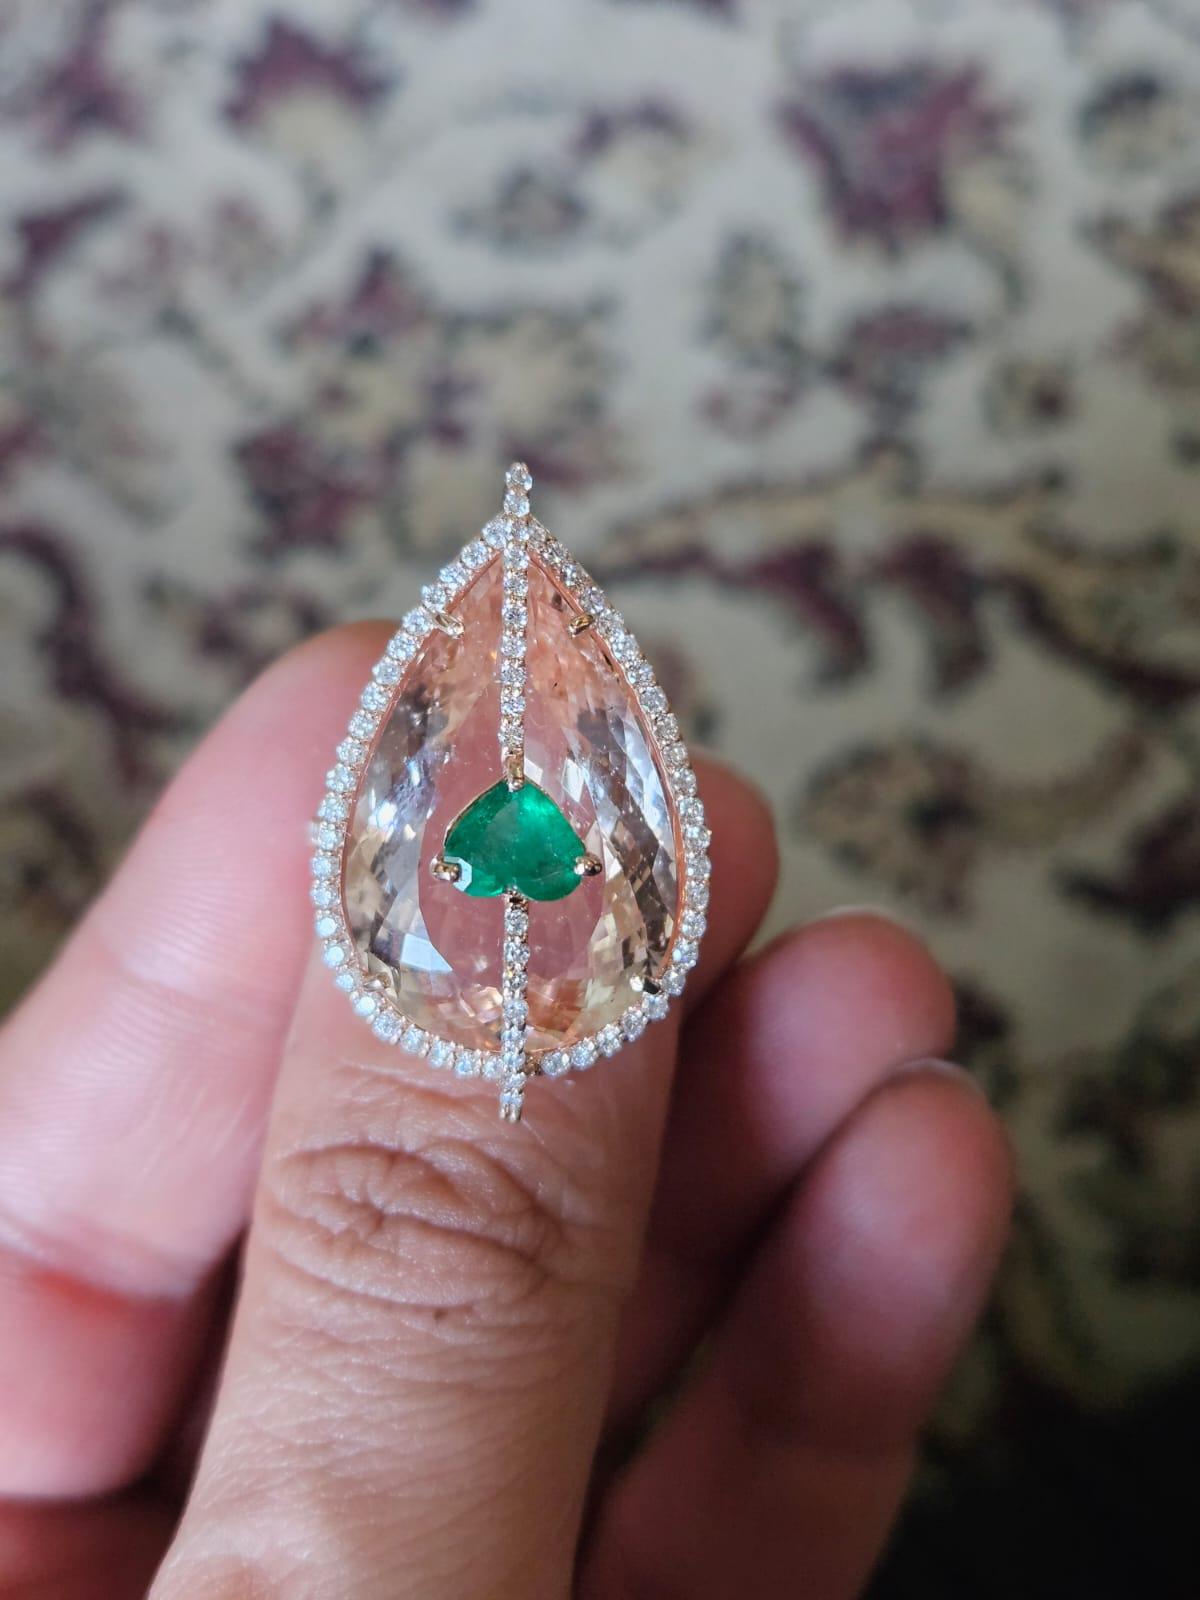 A very gorgeous and one of a kind, modern style, Morganite & Emerald Cocktail Ring set in 18K Rose Gold & Diamonds. The weight of the pear shaped Morganite is 21.25 carats. The heart shaped Emerald weight is 0.82 carats. The Emerald is completely